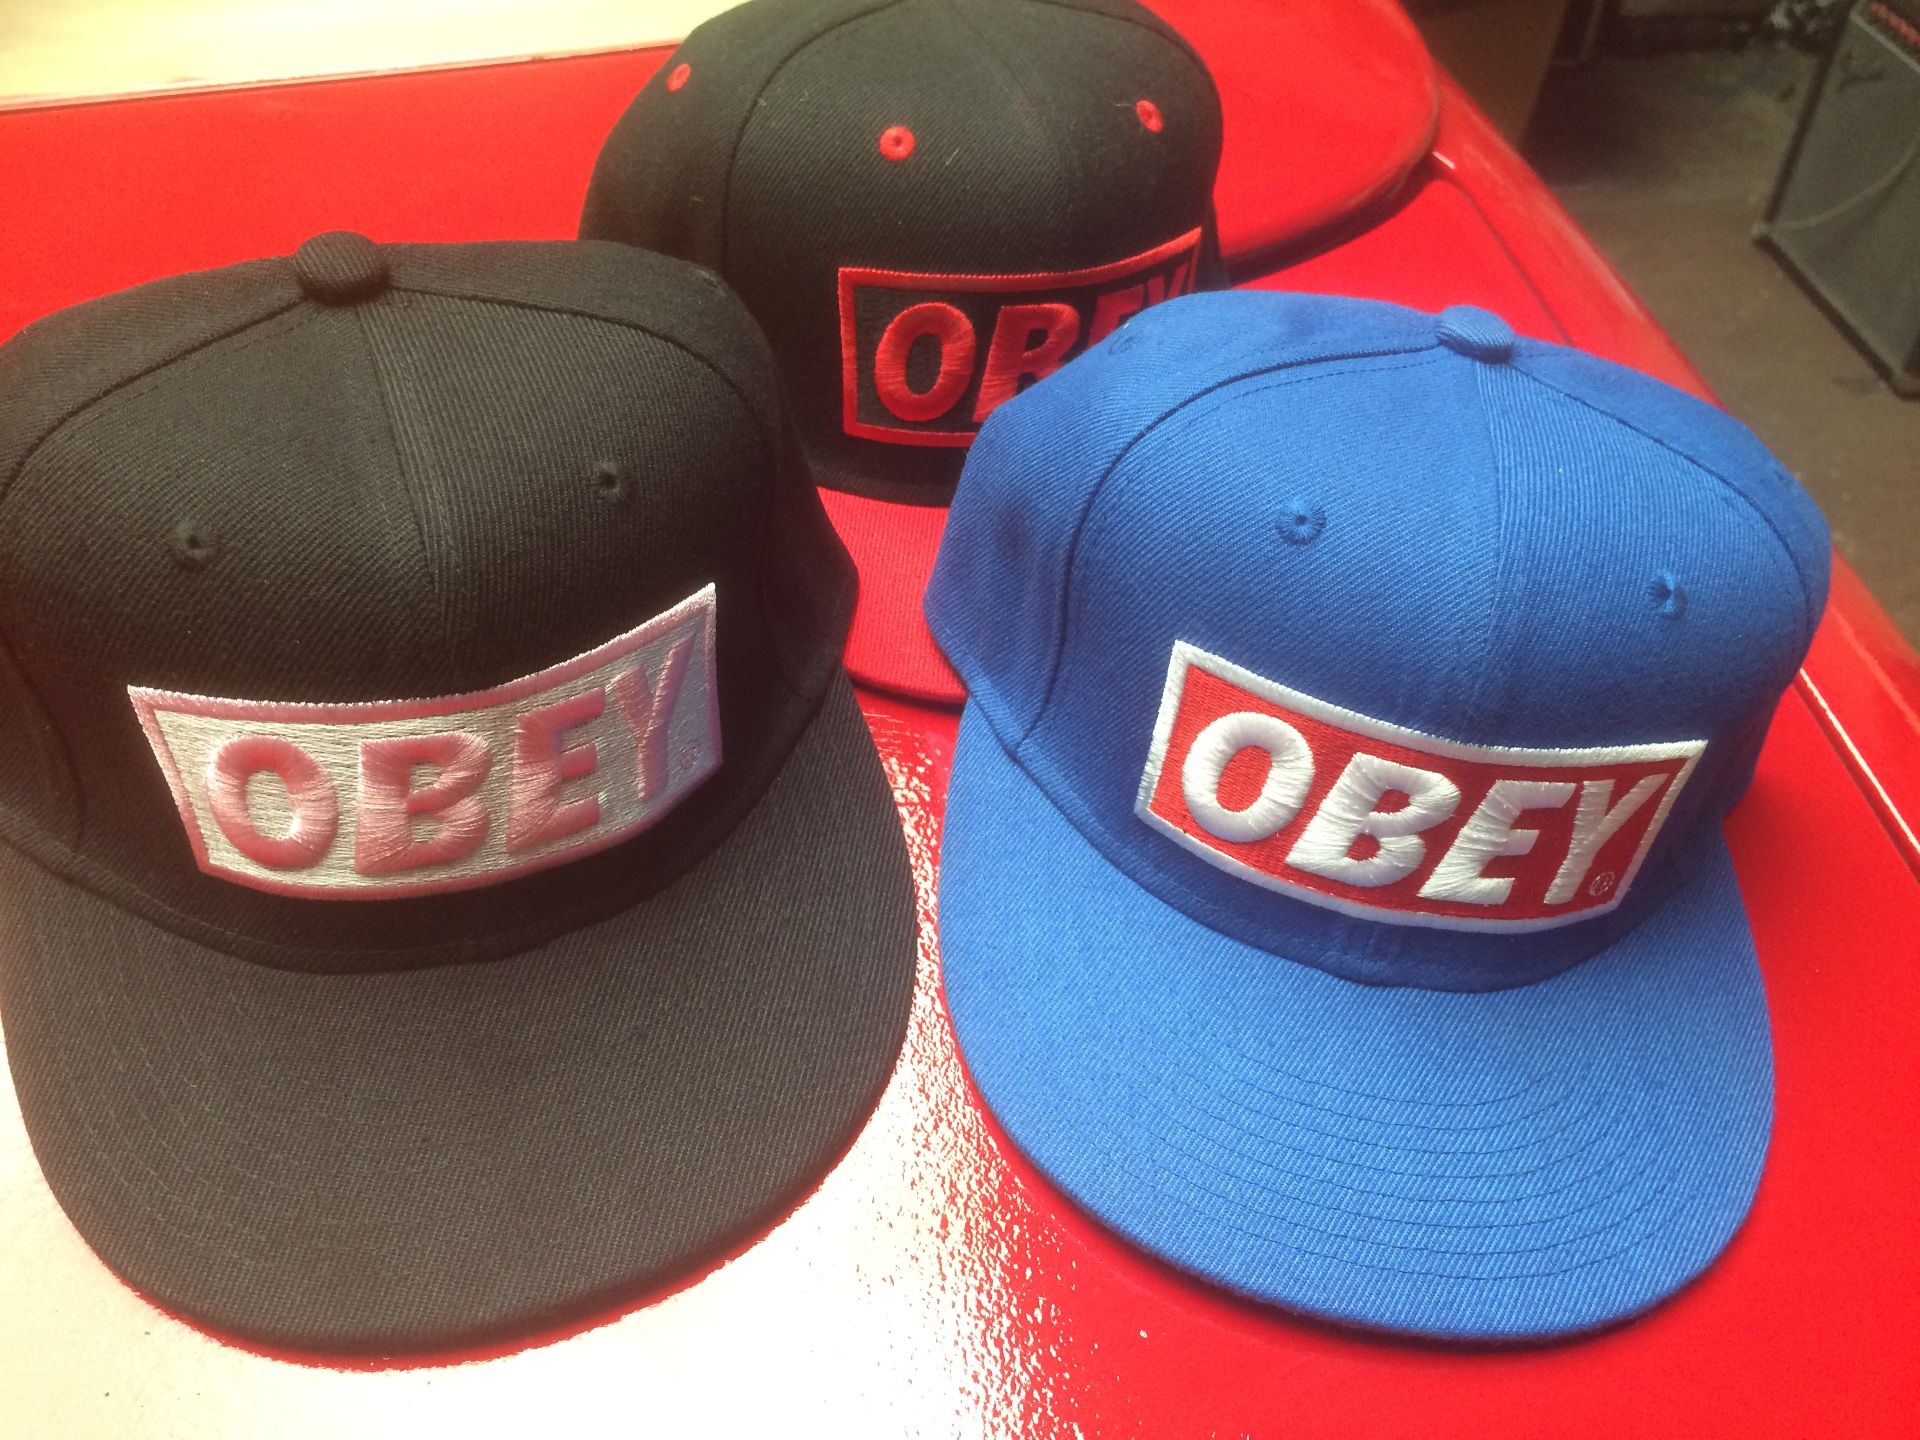 Baseball caps. Designer " OBEY" sold in lots of three, bid price is for three